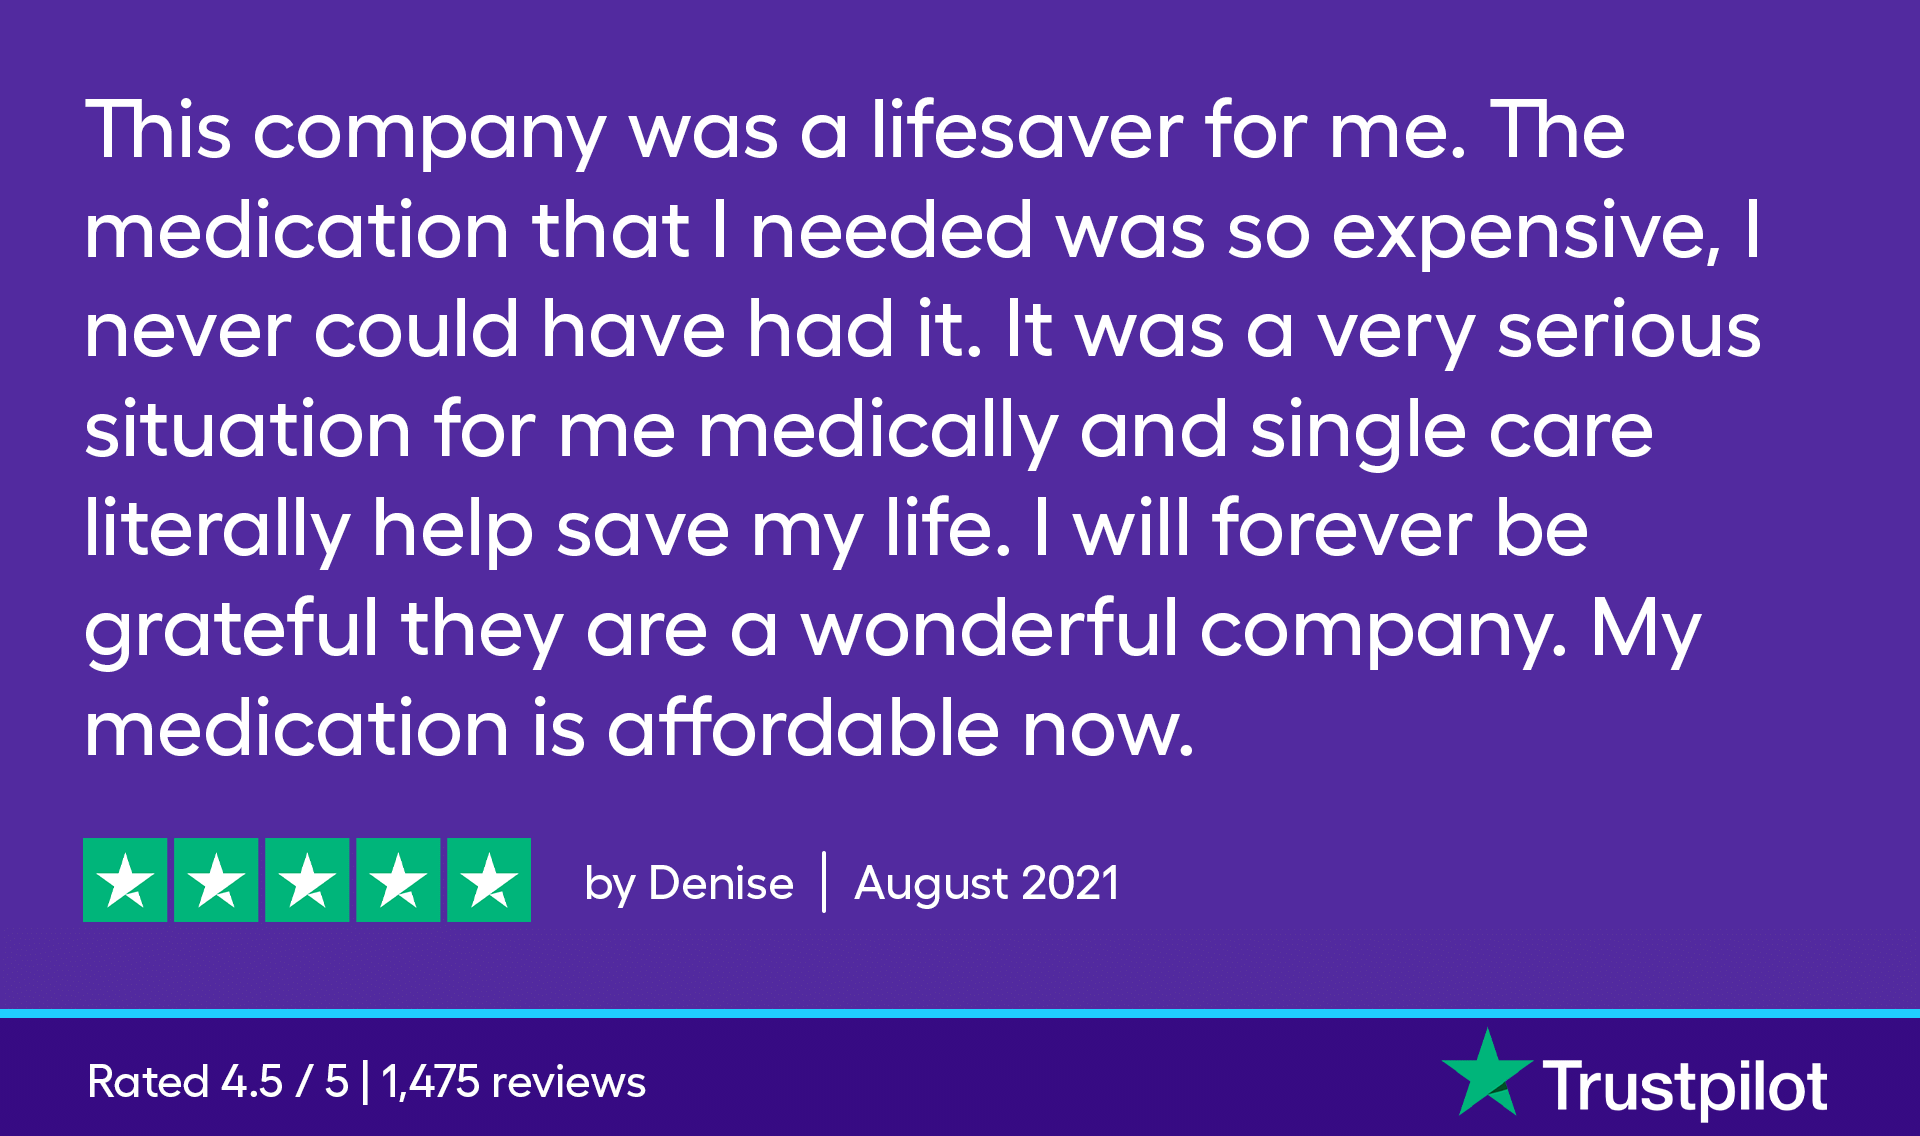 This company was a lifesaver for me. The medication that I needed was so expensive, I never could have had it. It was a very serious situation for me medically and SingleCare literally help save my life. I will forever be grateful, they are wonderful company. My medication is affordable now.